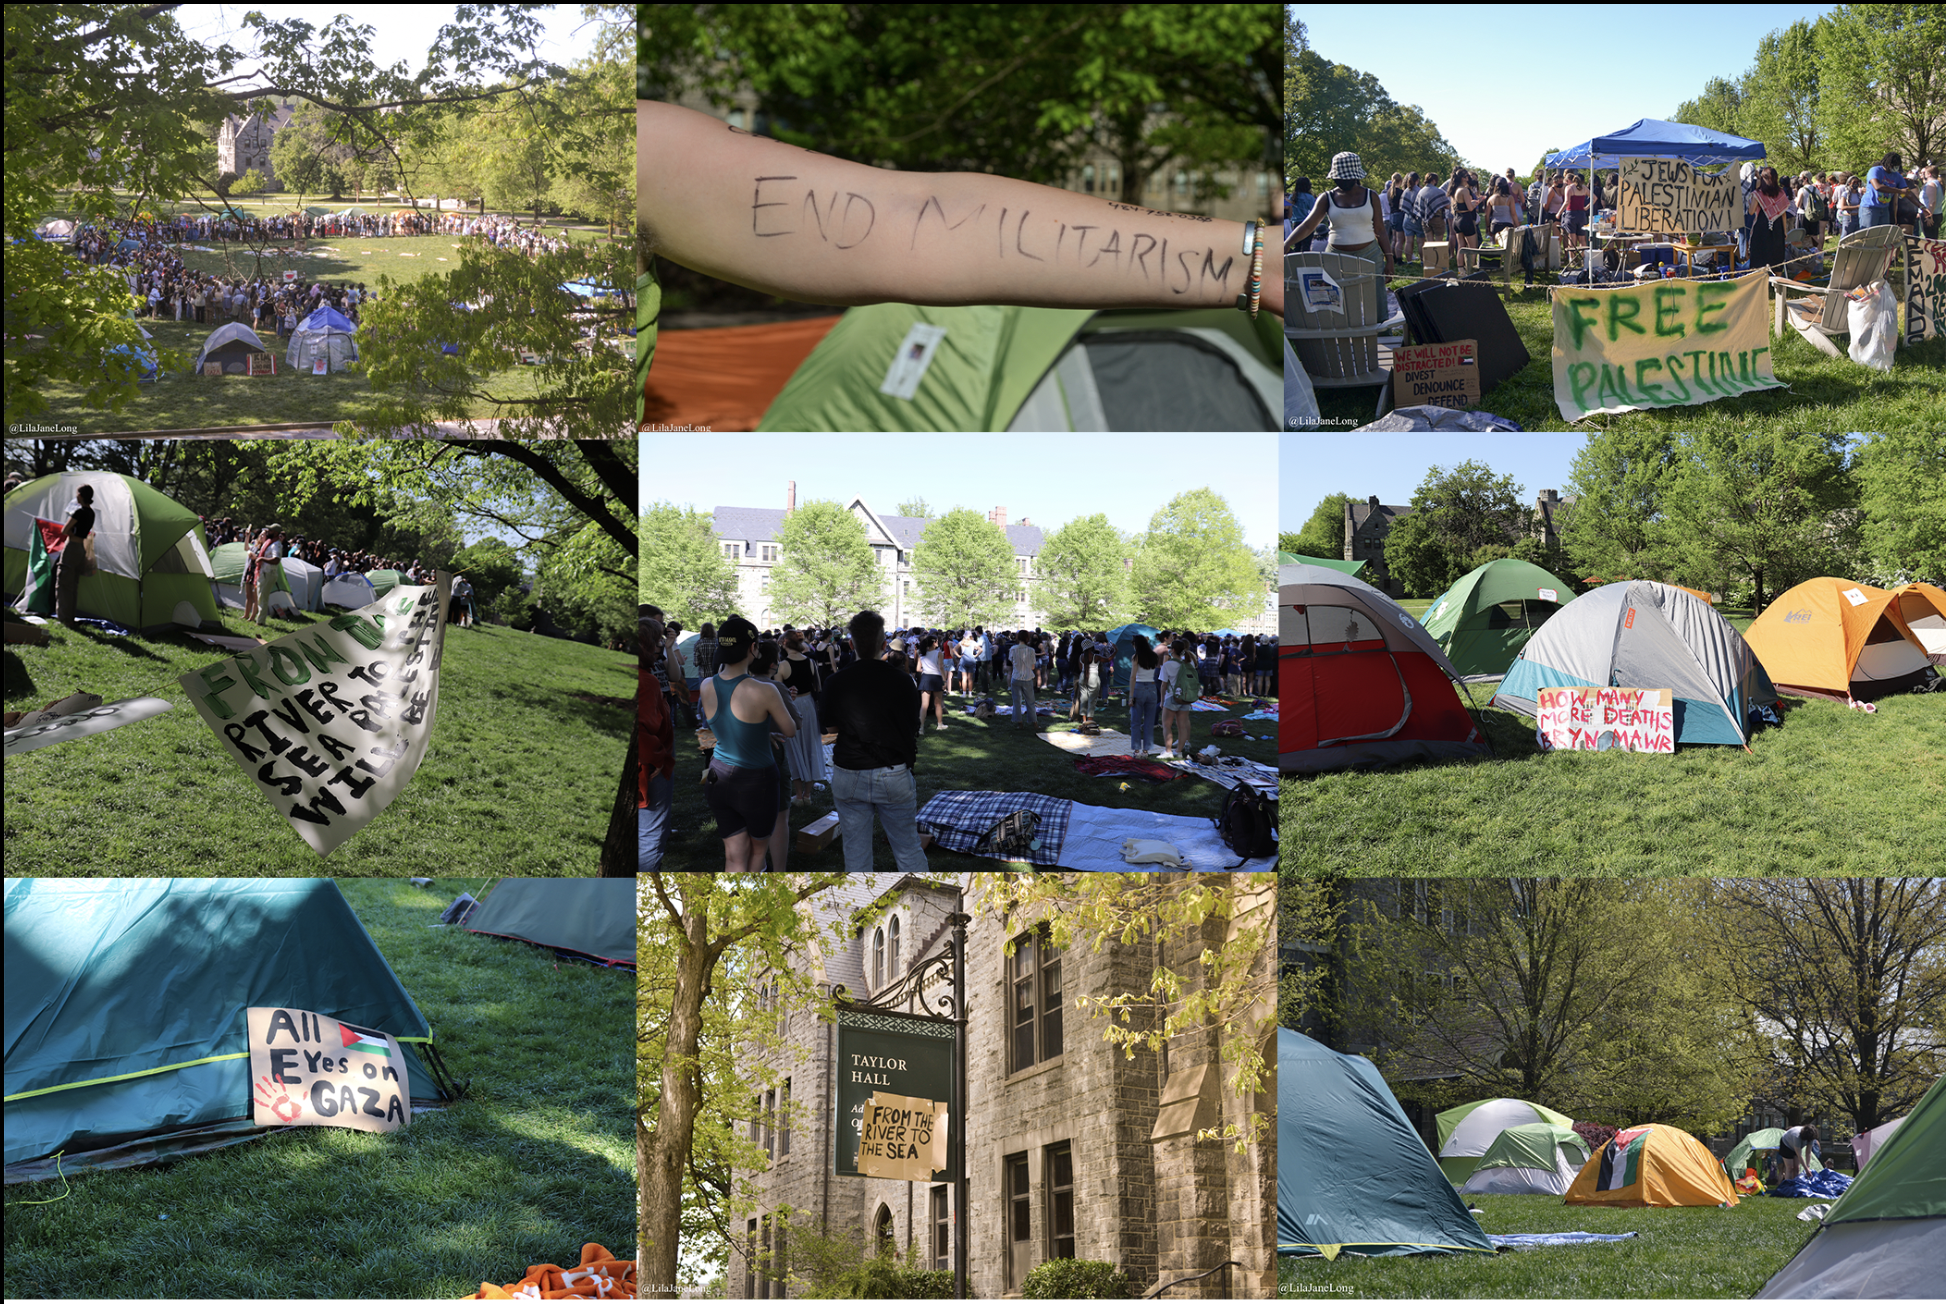 A Week of The People’s College: Bryn Mawr’s Encampment in Photos